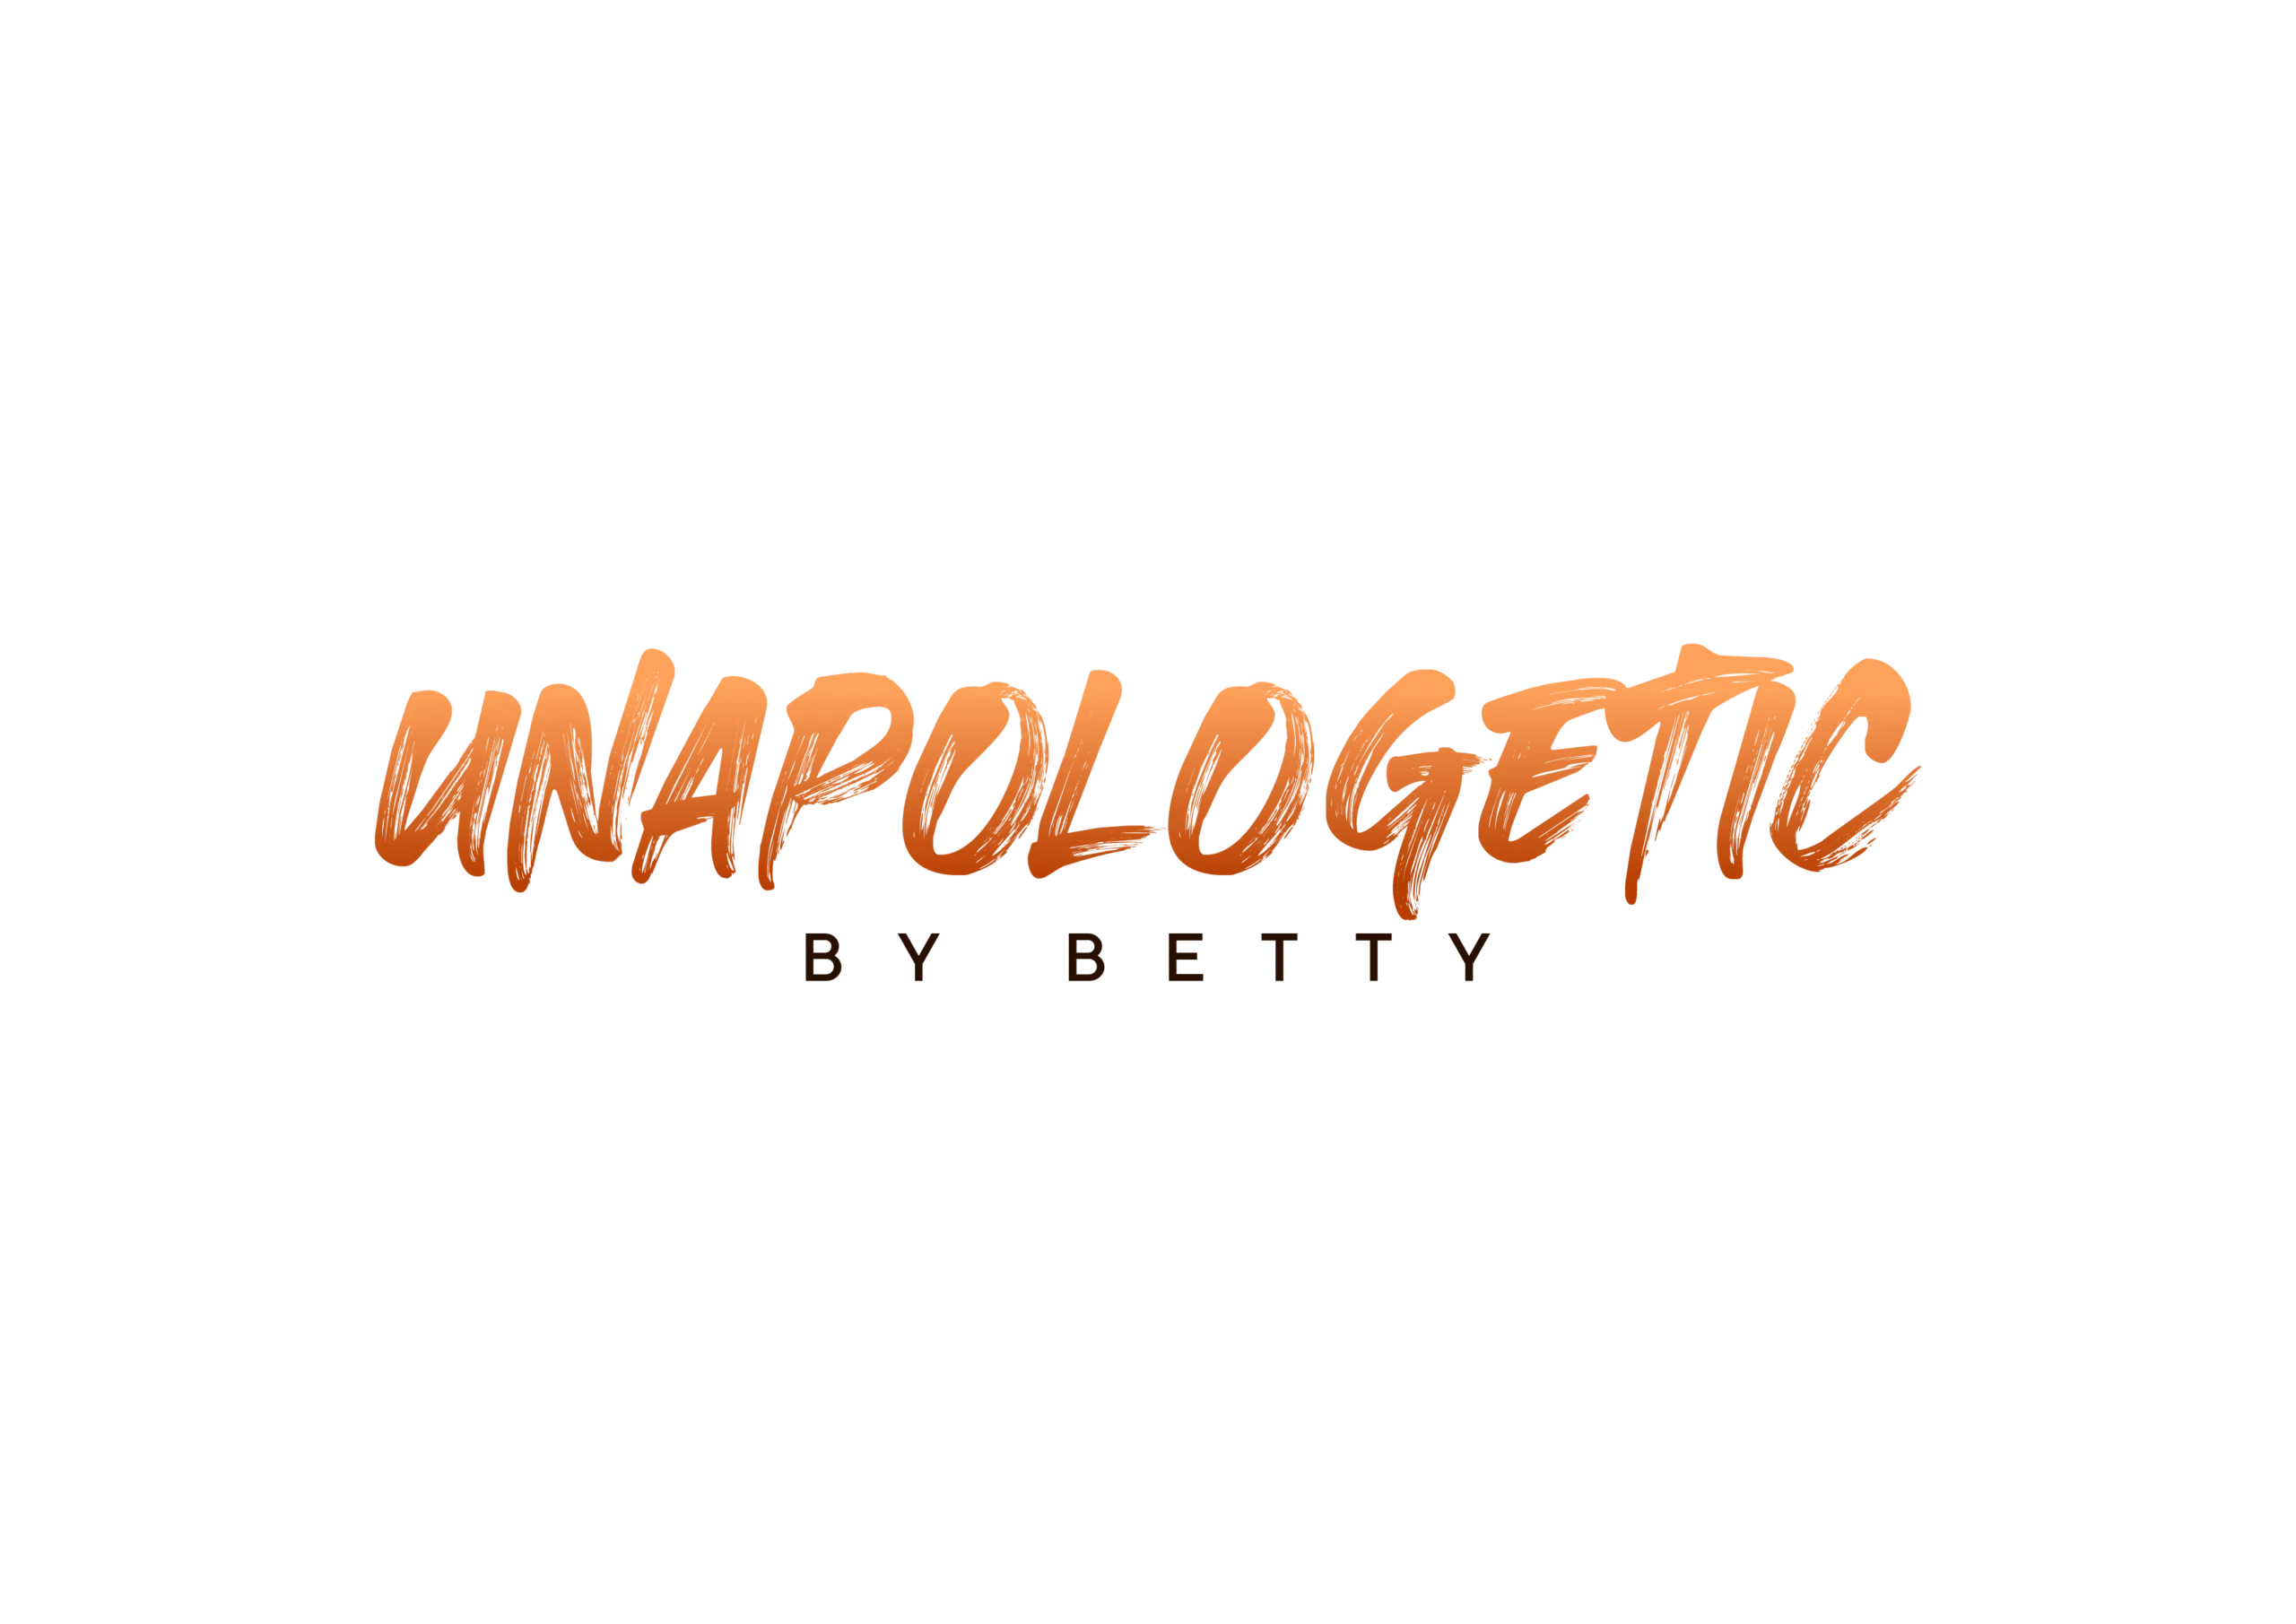 Unapologetic By Betty : Brand Short Description Type Here.